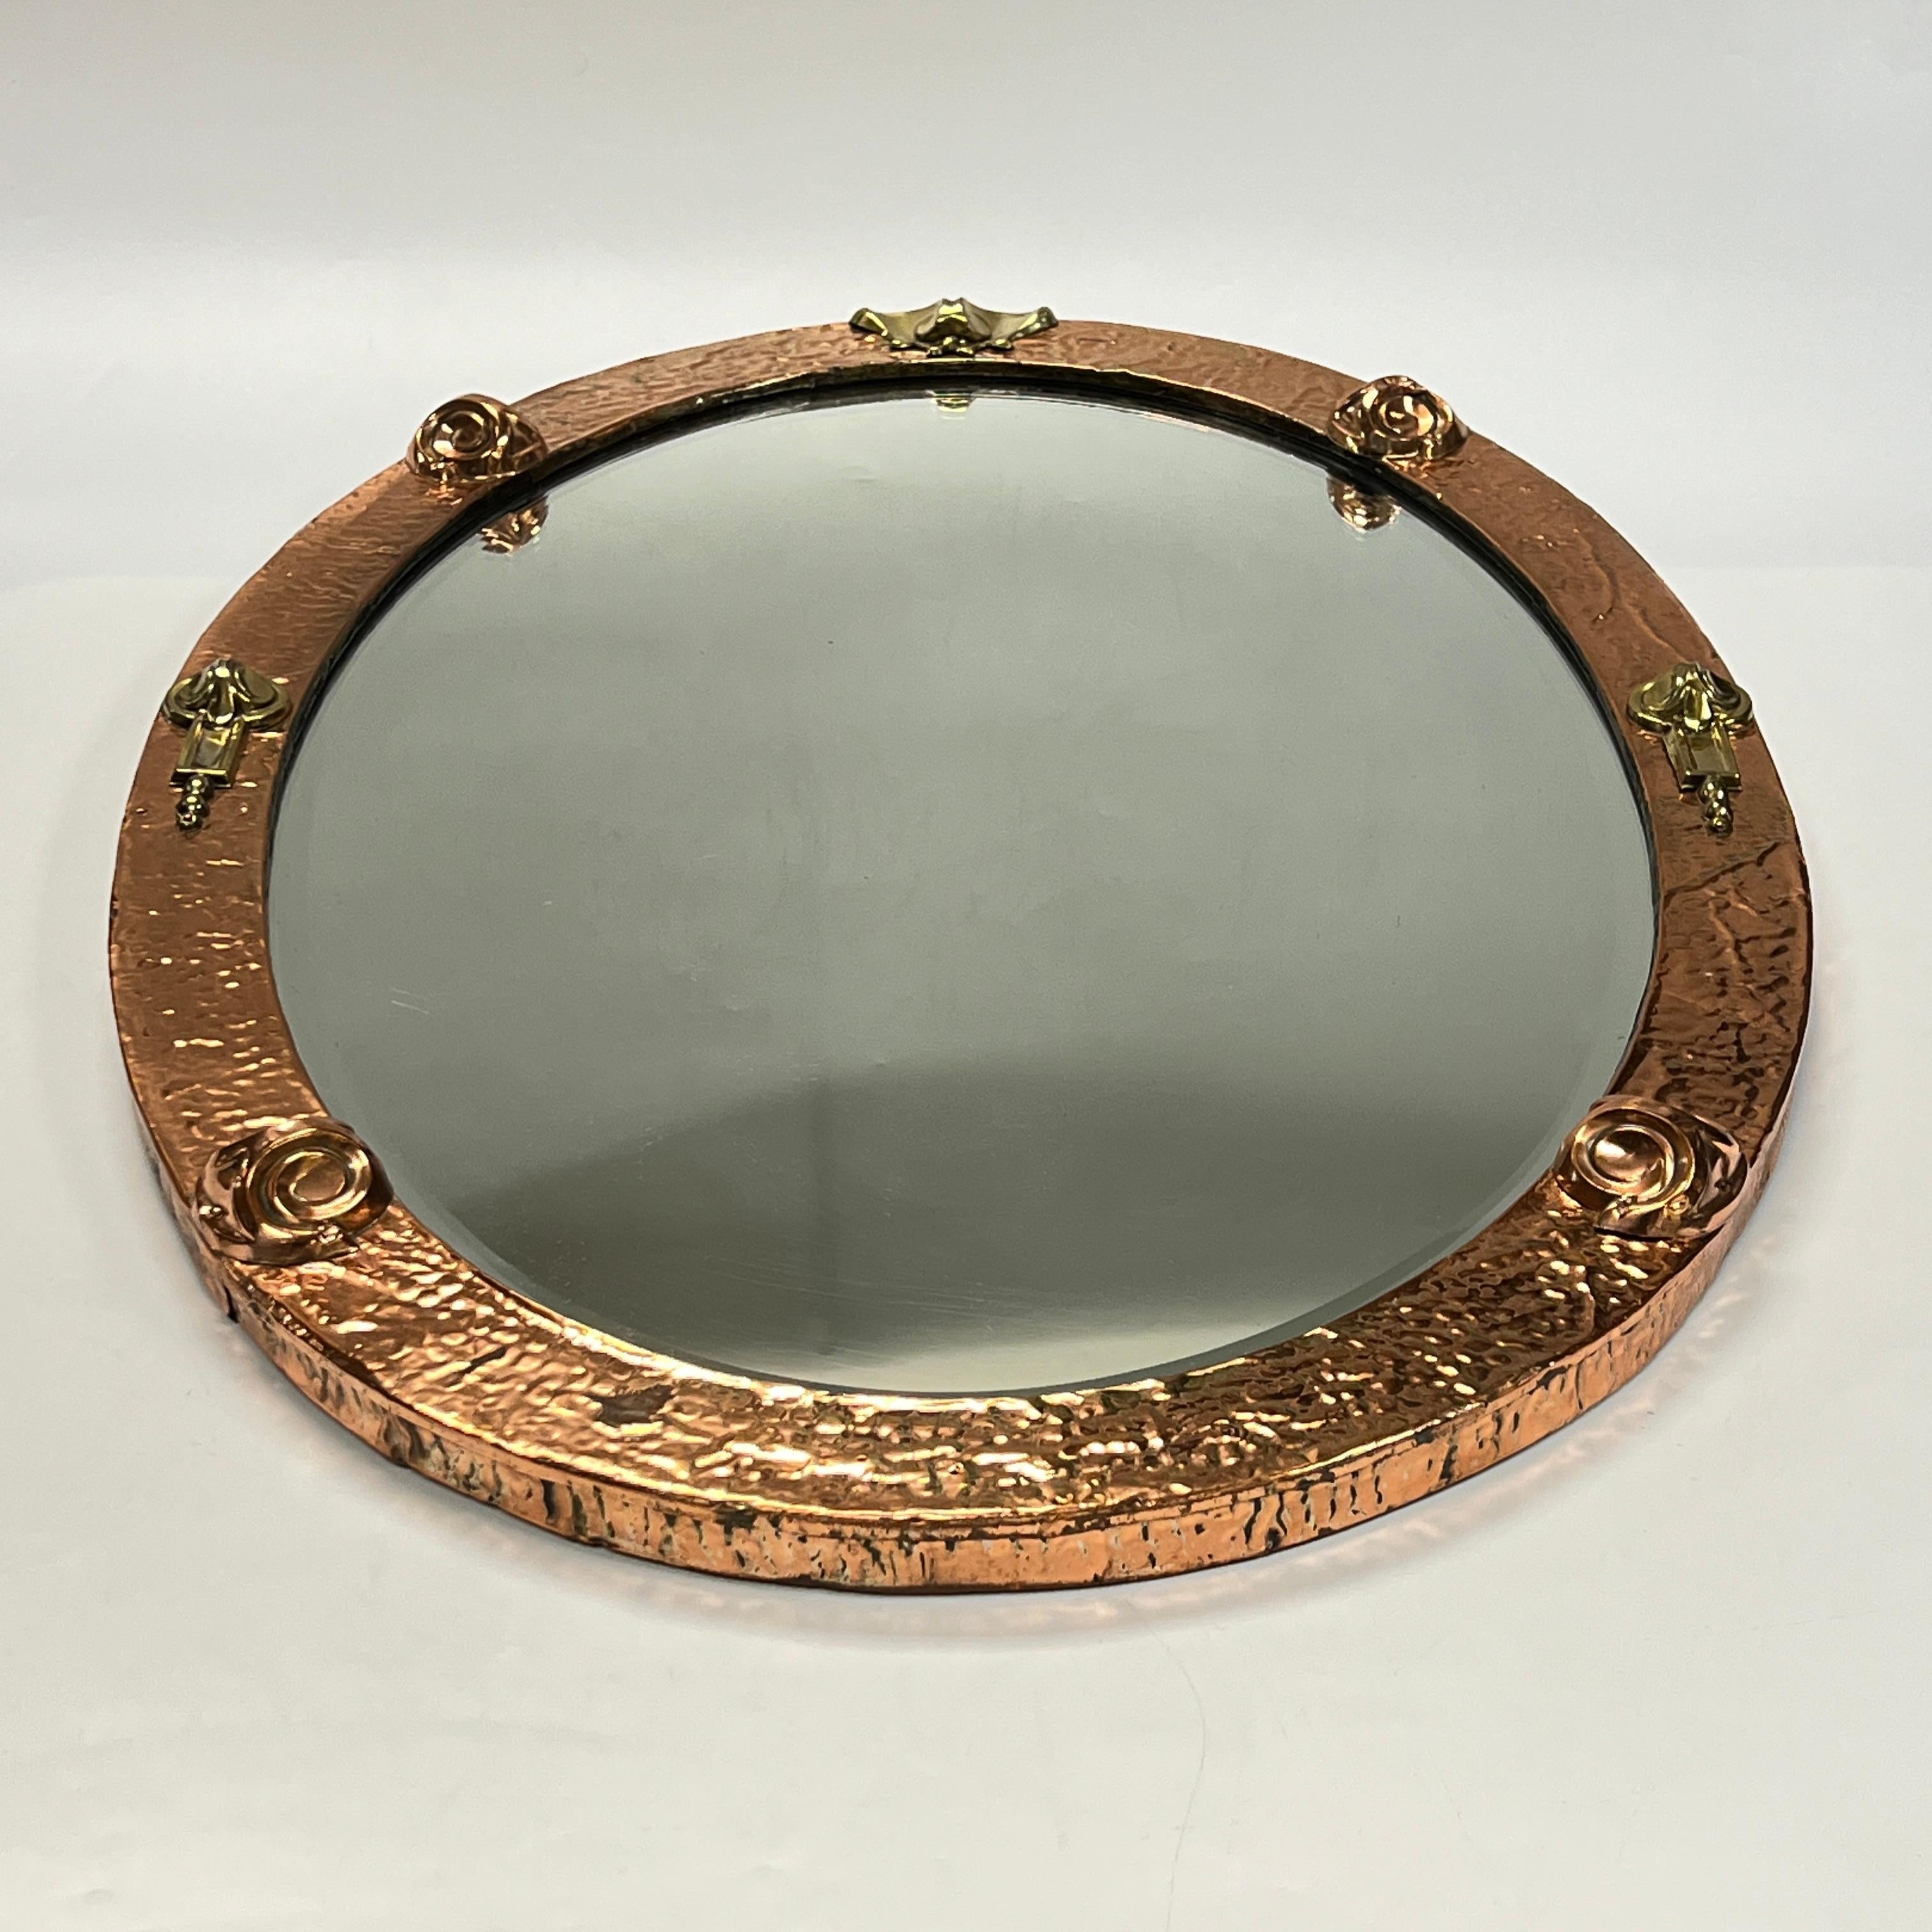 Fine oval-shaped mirror in the Arts and Crafts style, hand-hammered copper over wooden frame with raised, applied brass designs including scrolls and volutes.